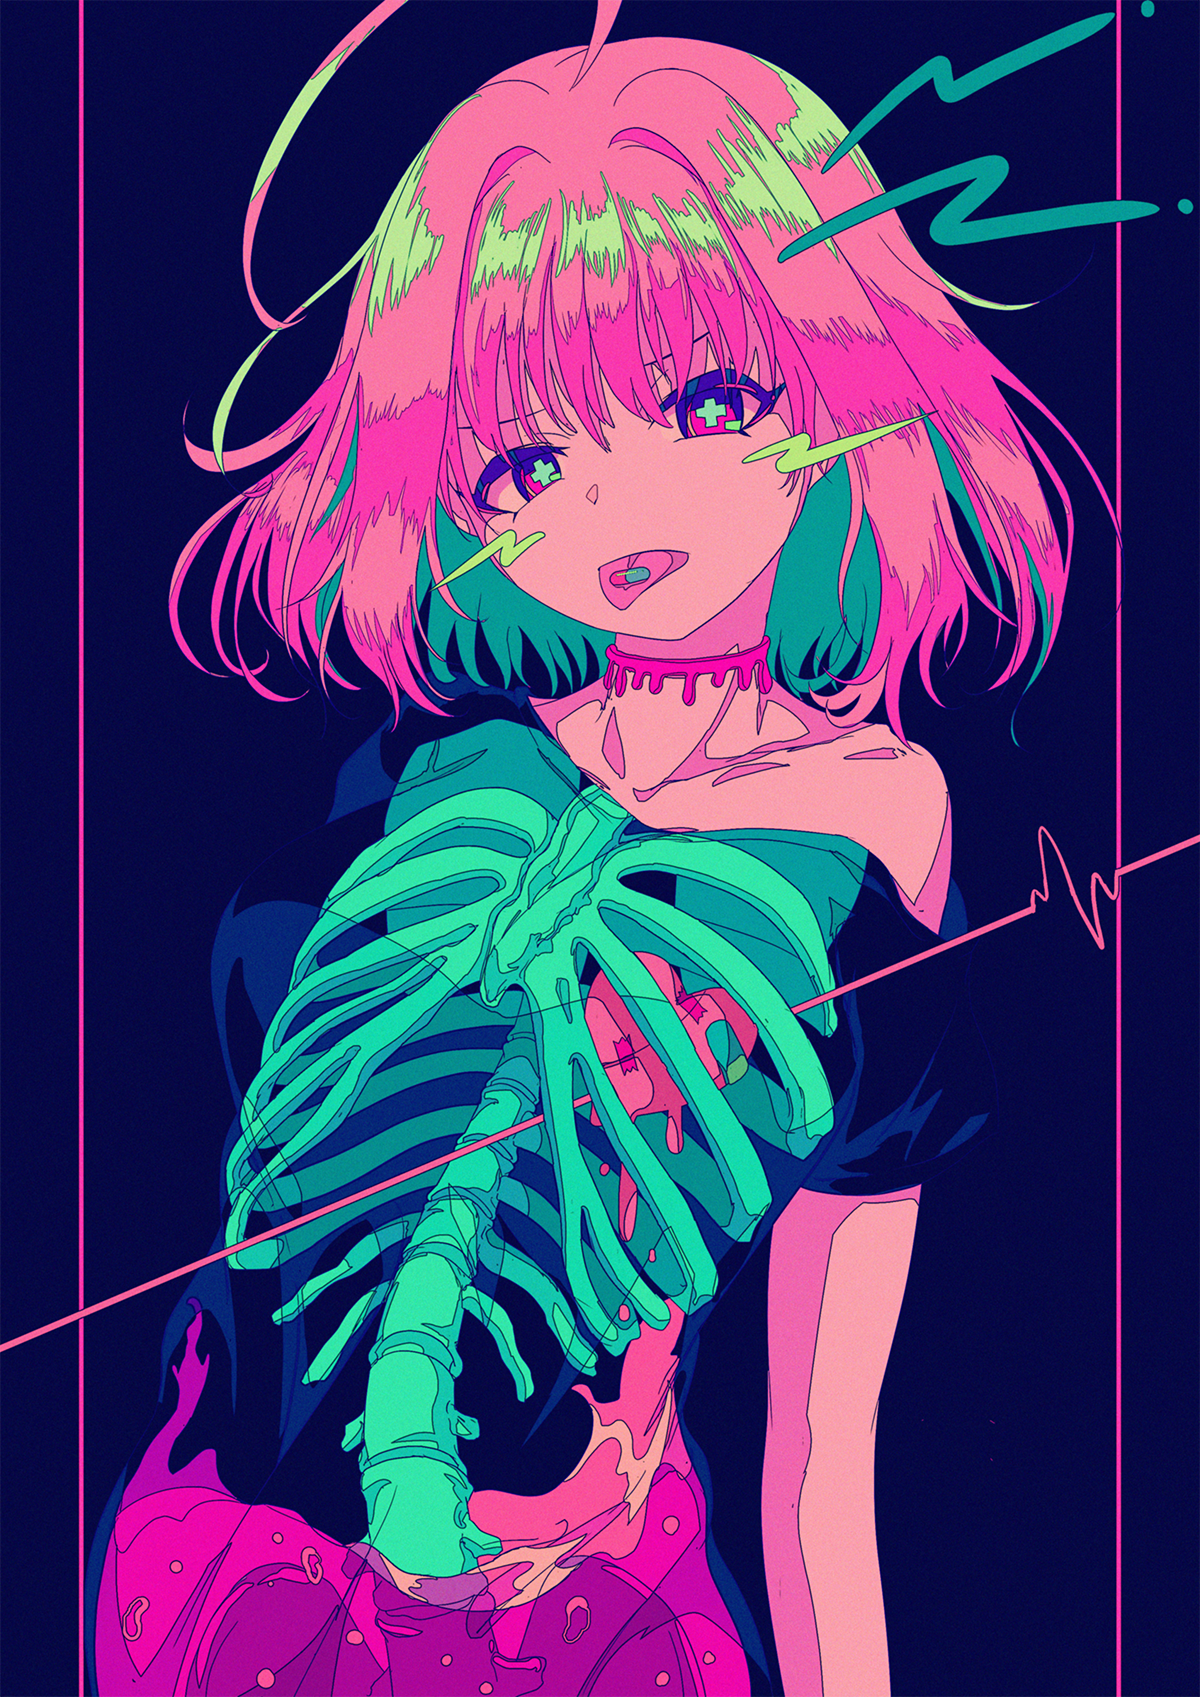 Anime 1200x1697 anime anime girls THE iDOLM@STER: Cinderella Girls Riamu Yumemi Berry Verrine ribs ghoul heart cyan pink hair tongue out pink THE iDOLM@STER drugs